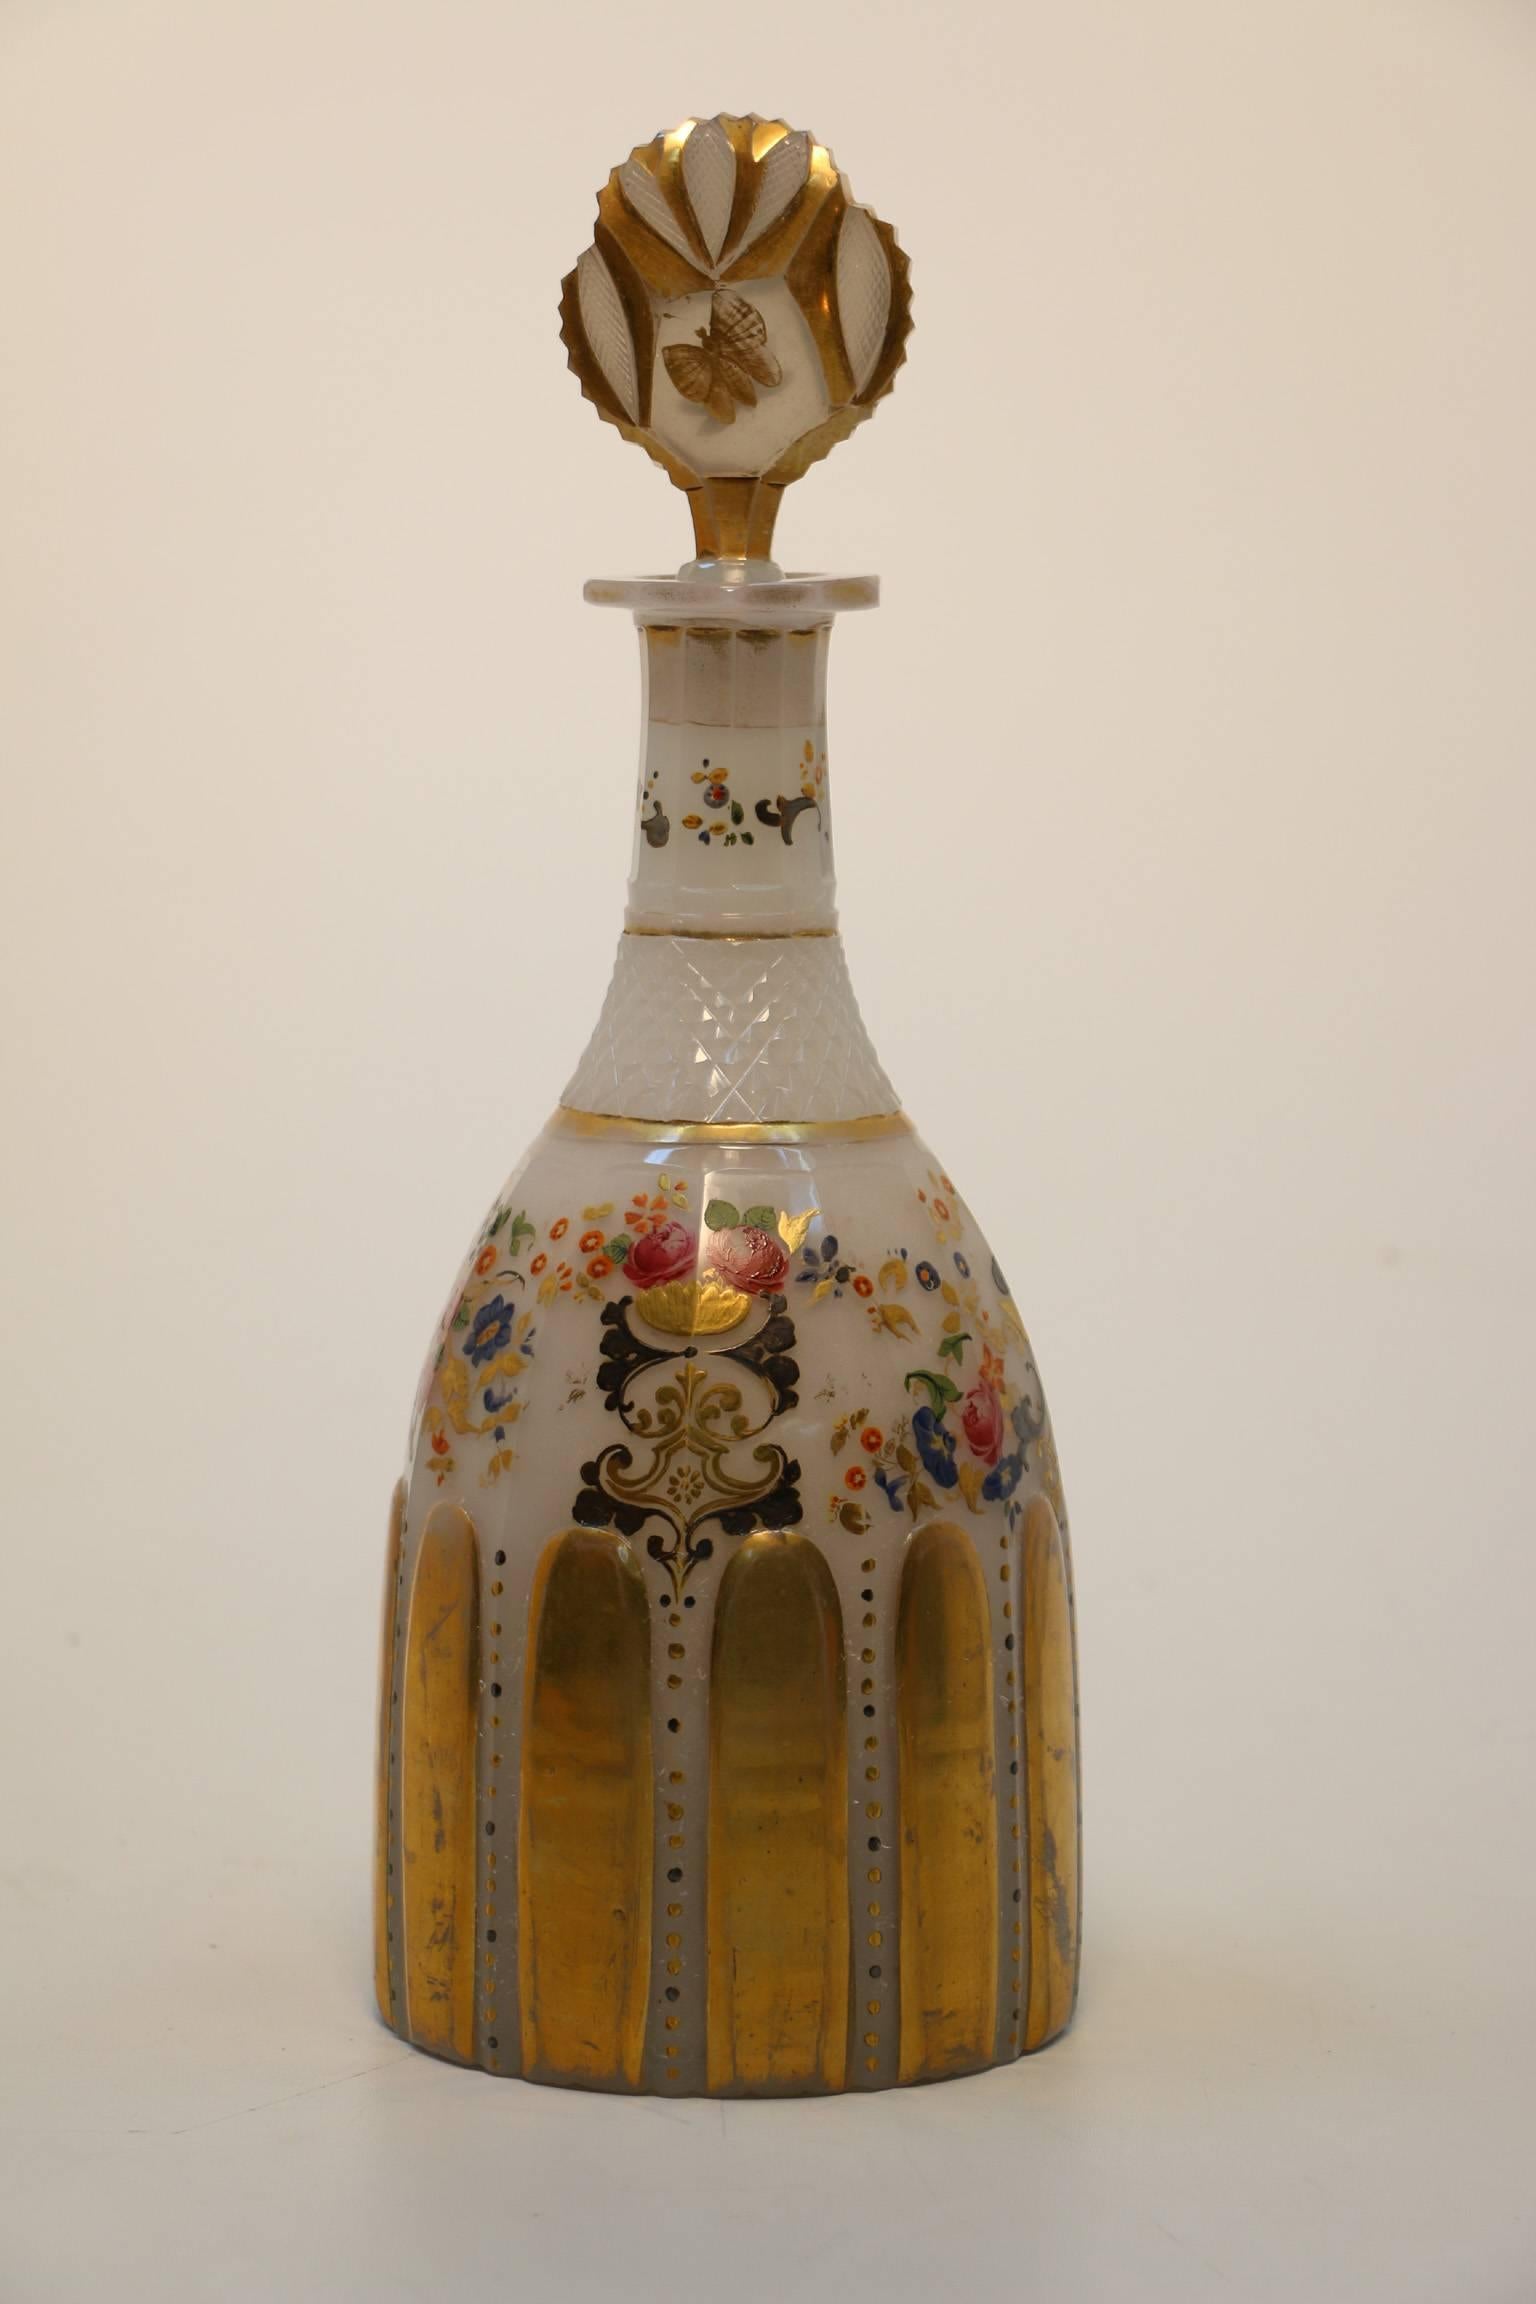 Bohemian Opalene Mallet Shaped Decanter and Stopper In Excellent Condition For Sale In Montreal, QC